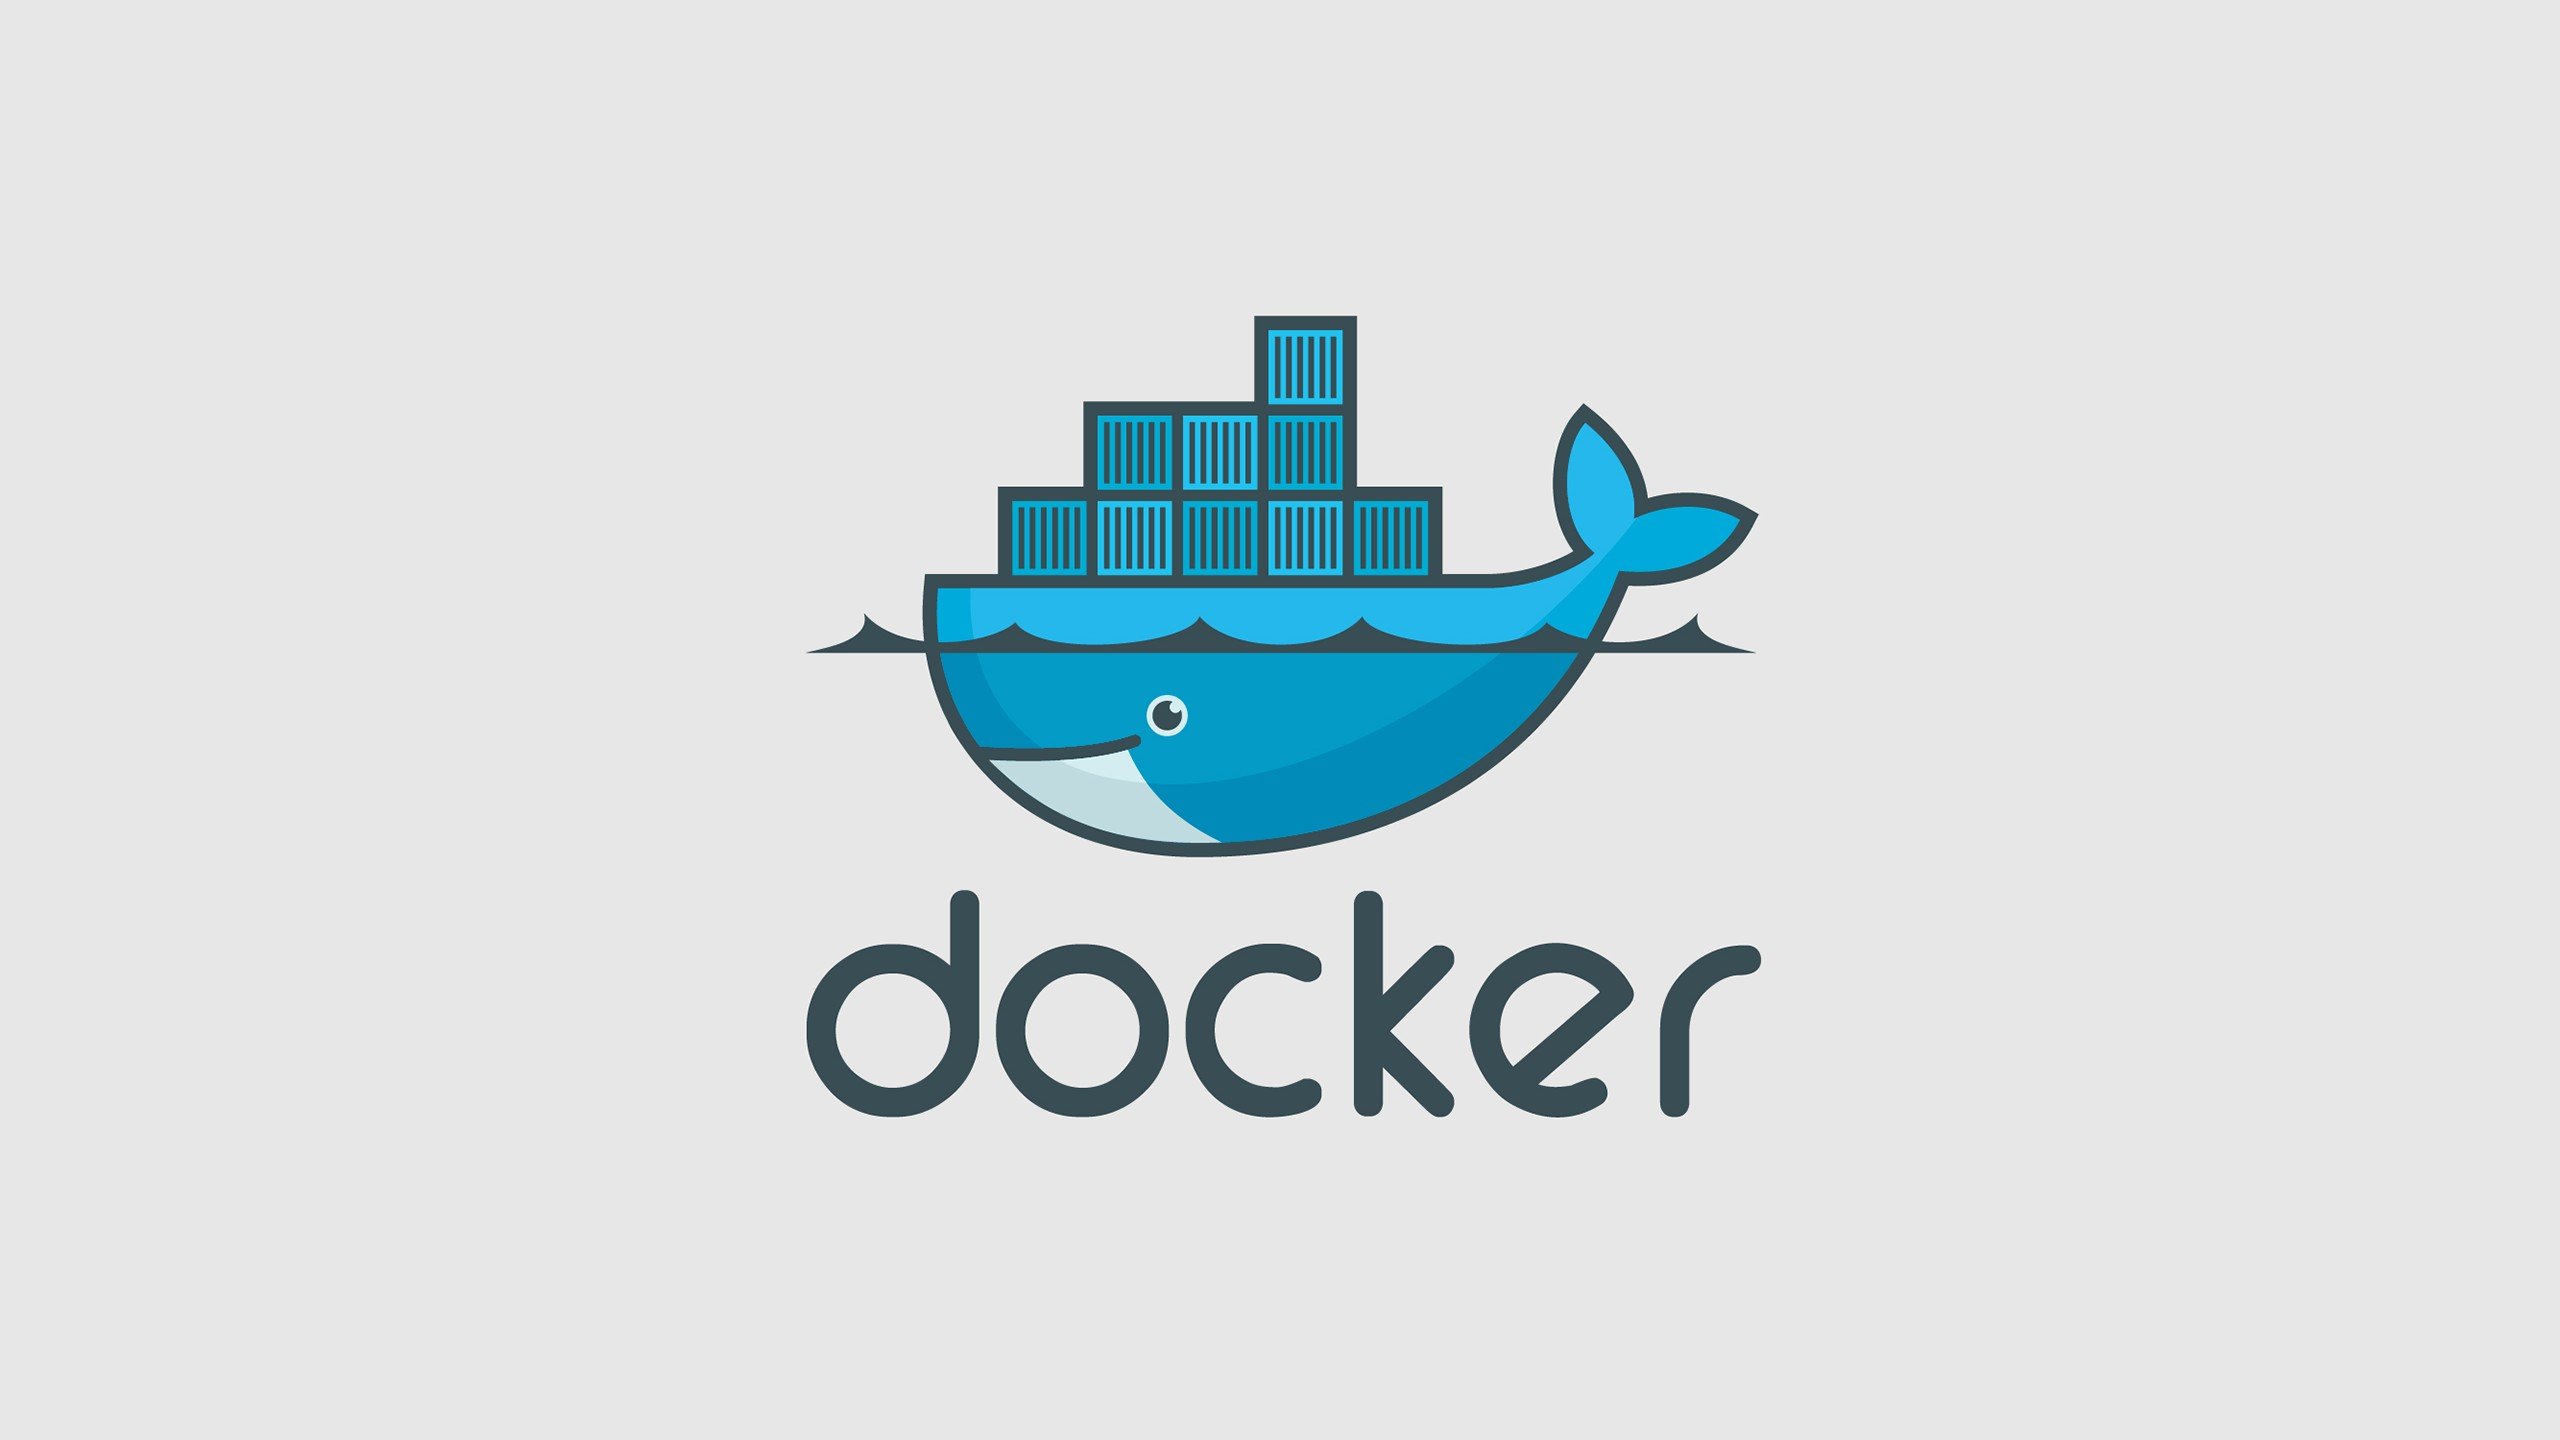 docker, Containers, Minimalism, Typography, Artwork, Simple background Wallpaper